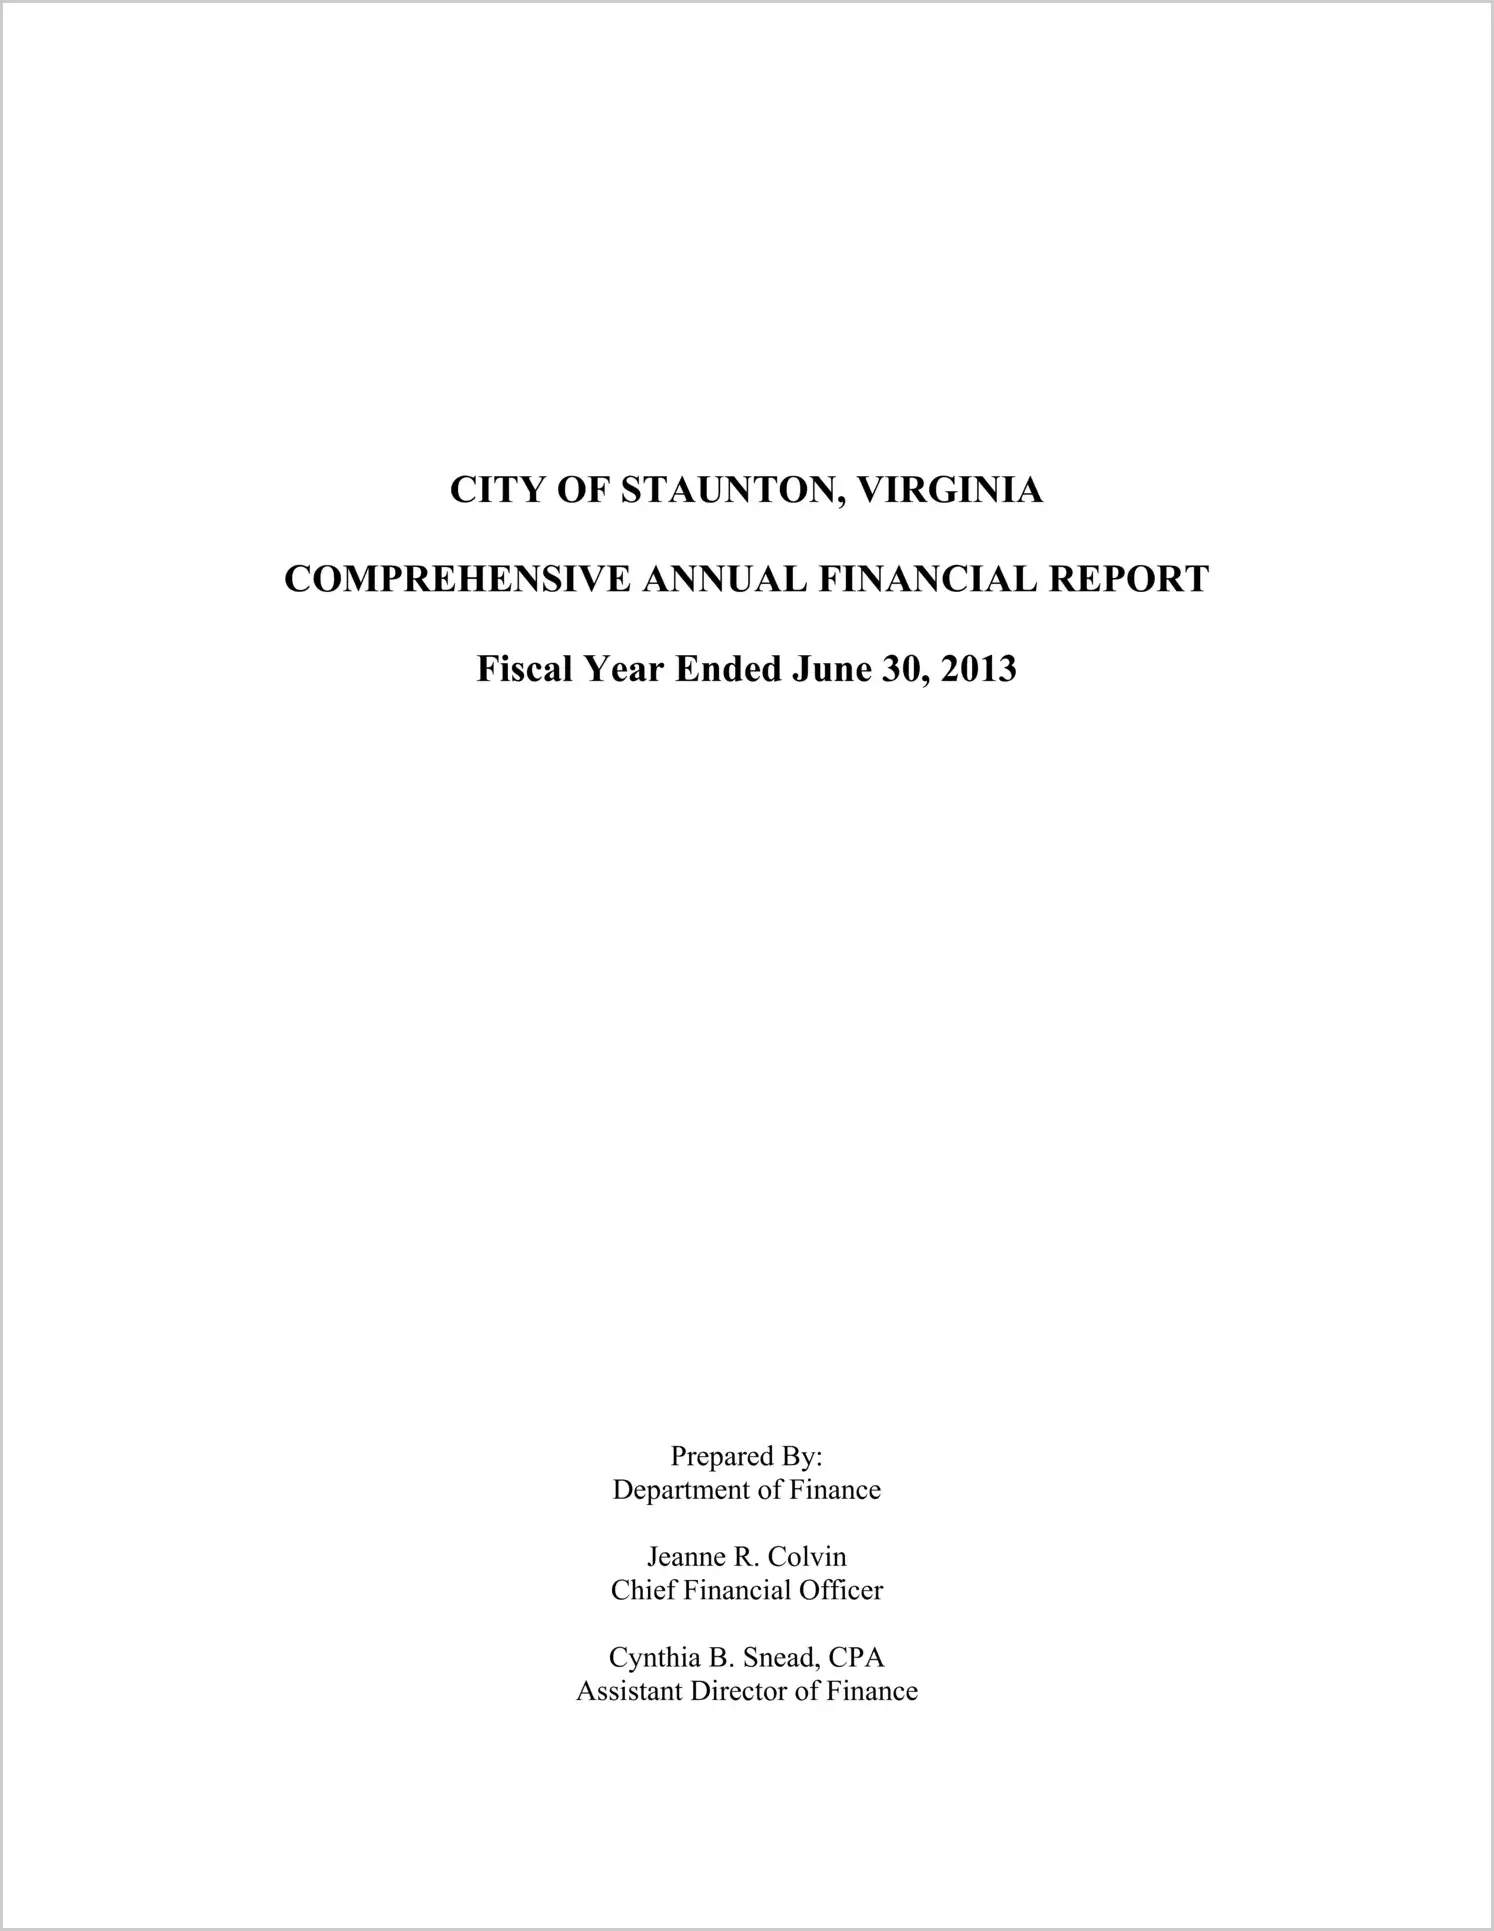 2013 Annual Financial Report for City of Staunton